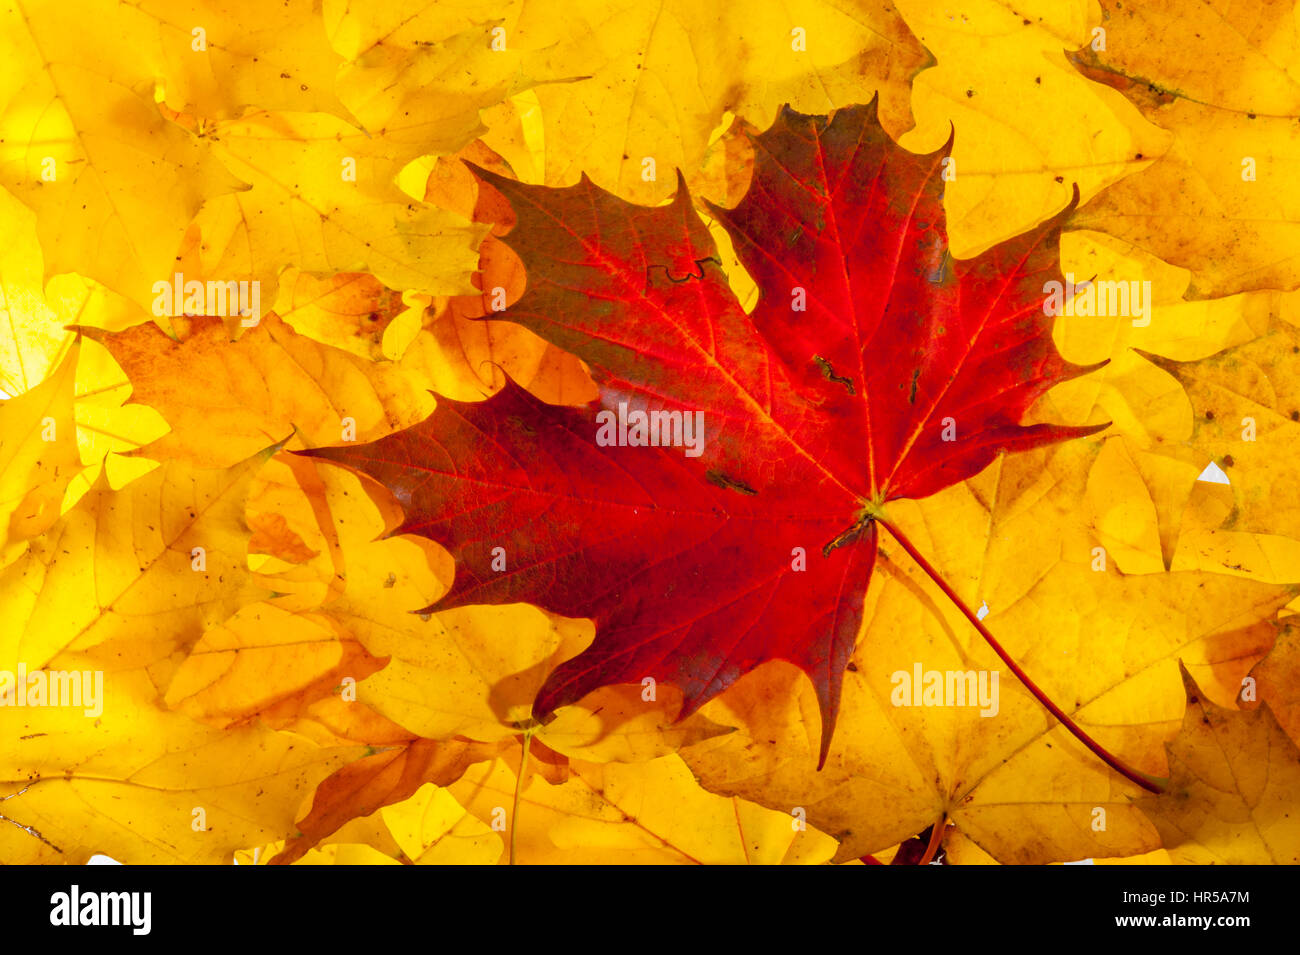 Red maple leaf on yellow maple leaves in the studio. Stock Photo